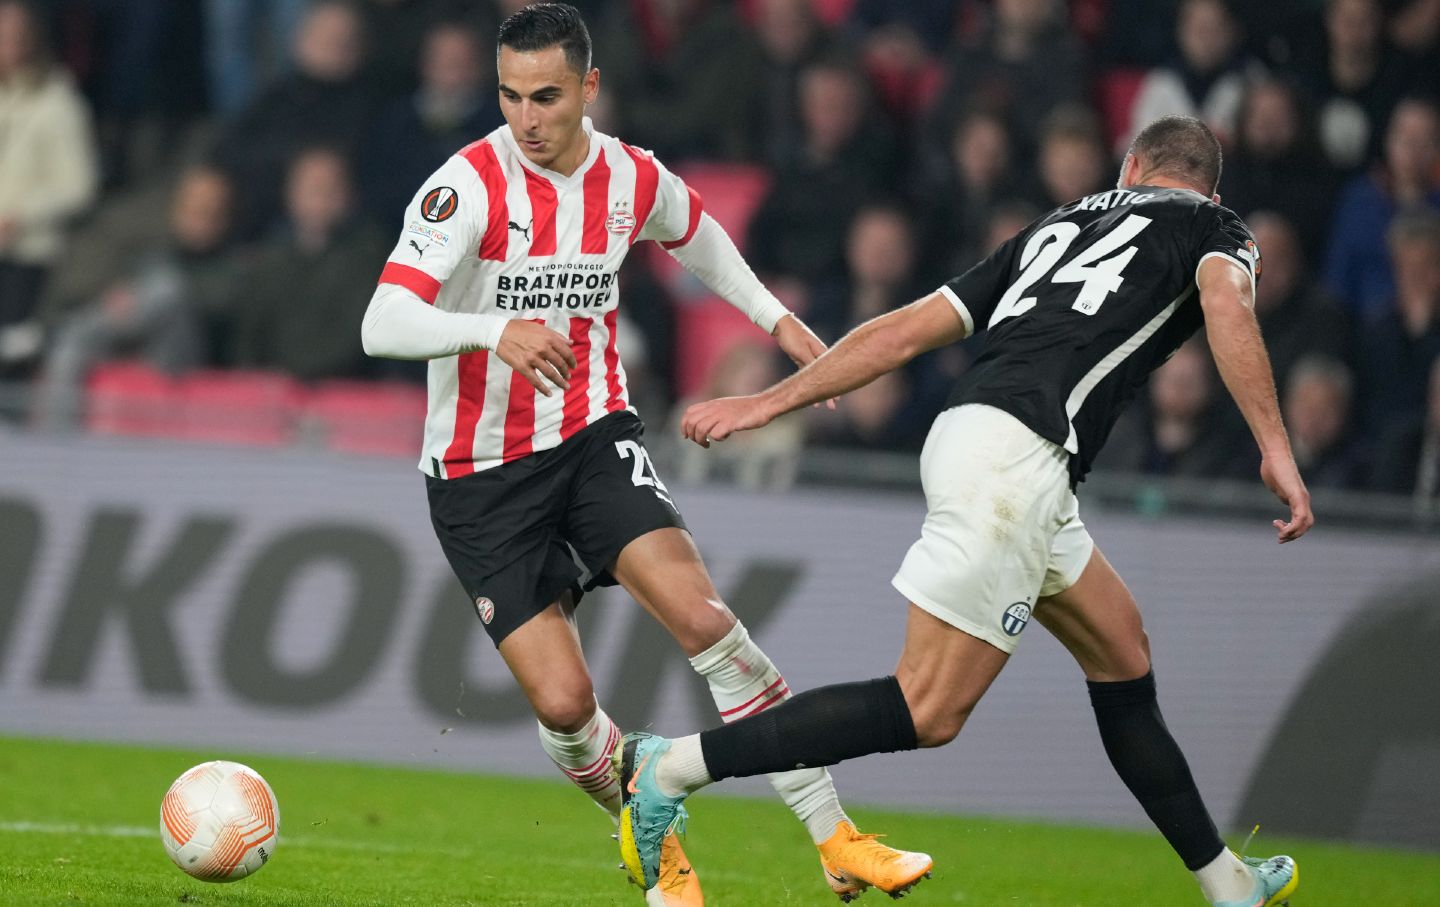 Then-PSV's and currently Bundesliga's Mainz player Anwar El Ghazi, left, scores his side's fifth goal during the Europa League group A soccer match between PSV and Zurich at the Philips stadium in Eindhoven, Netherlands, on October 13, 2022.